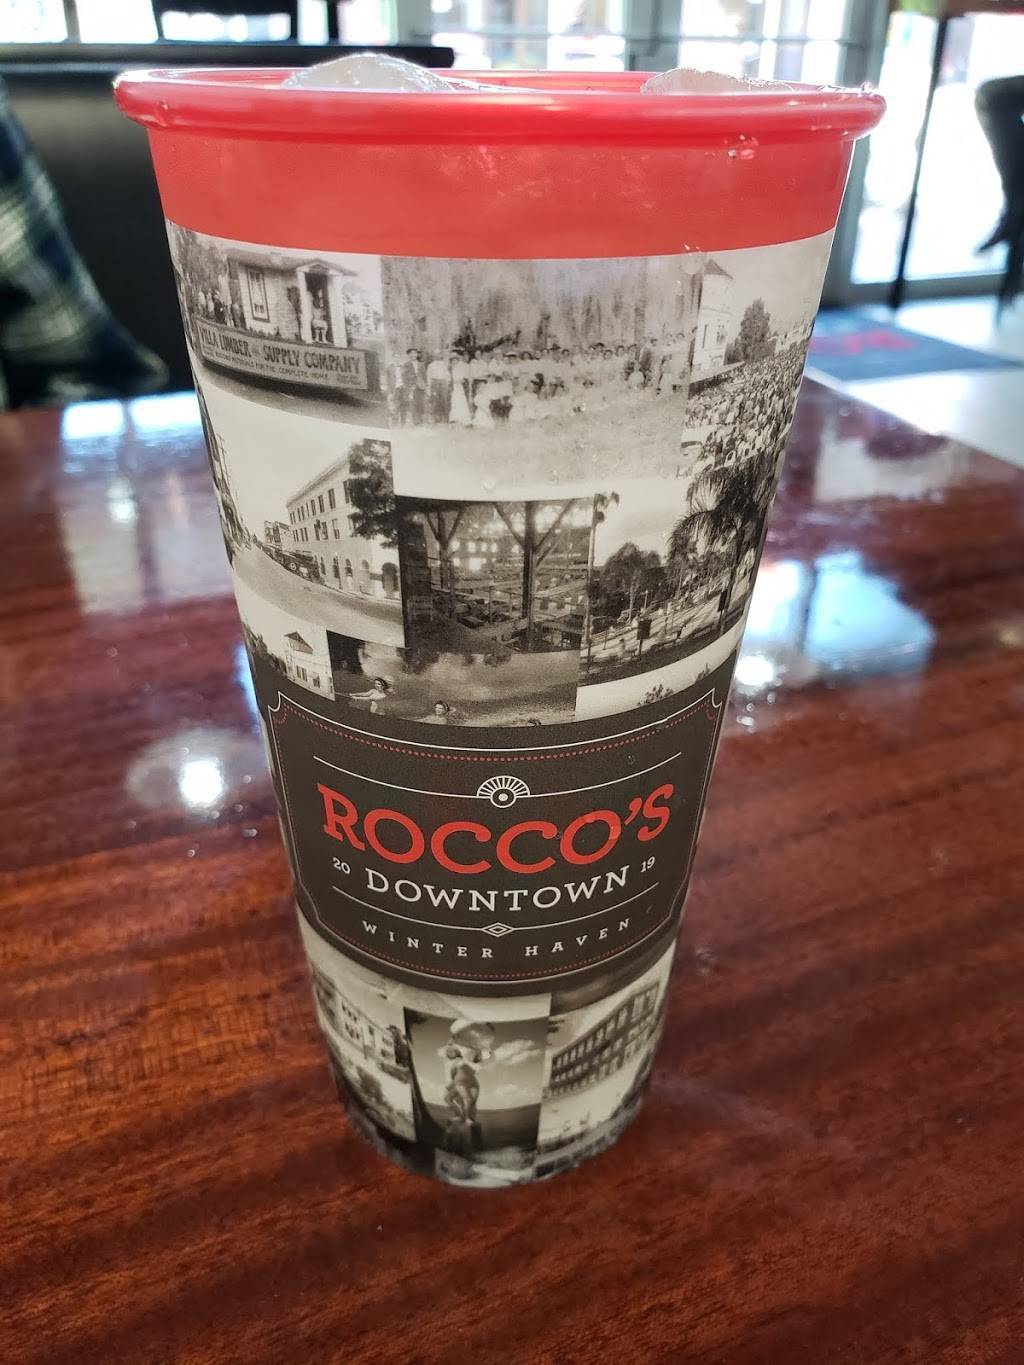 Roccos Downtown | restaurant | 276 W Central Ave, Winter Haven, FL 33880, USA | 8636623280 OR +1 863-662-3280